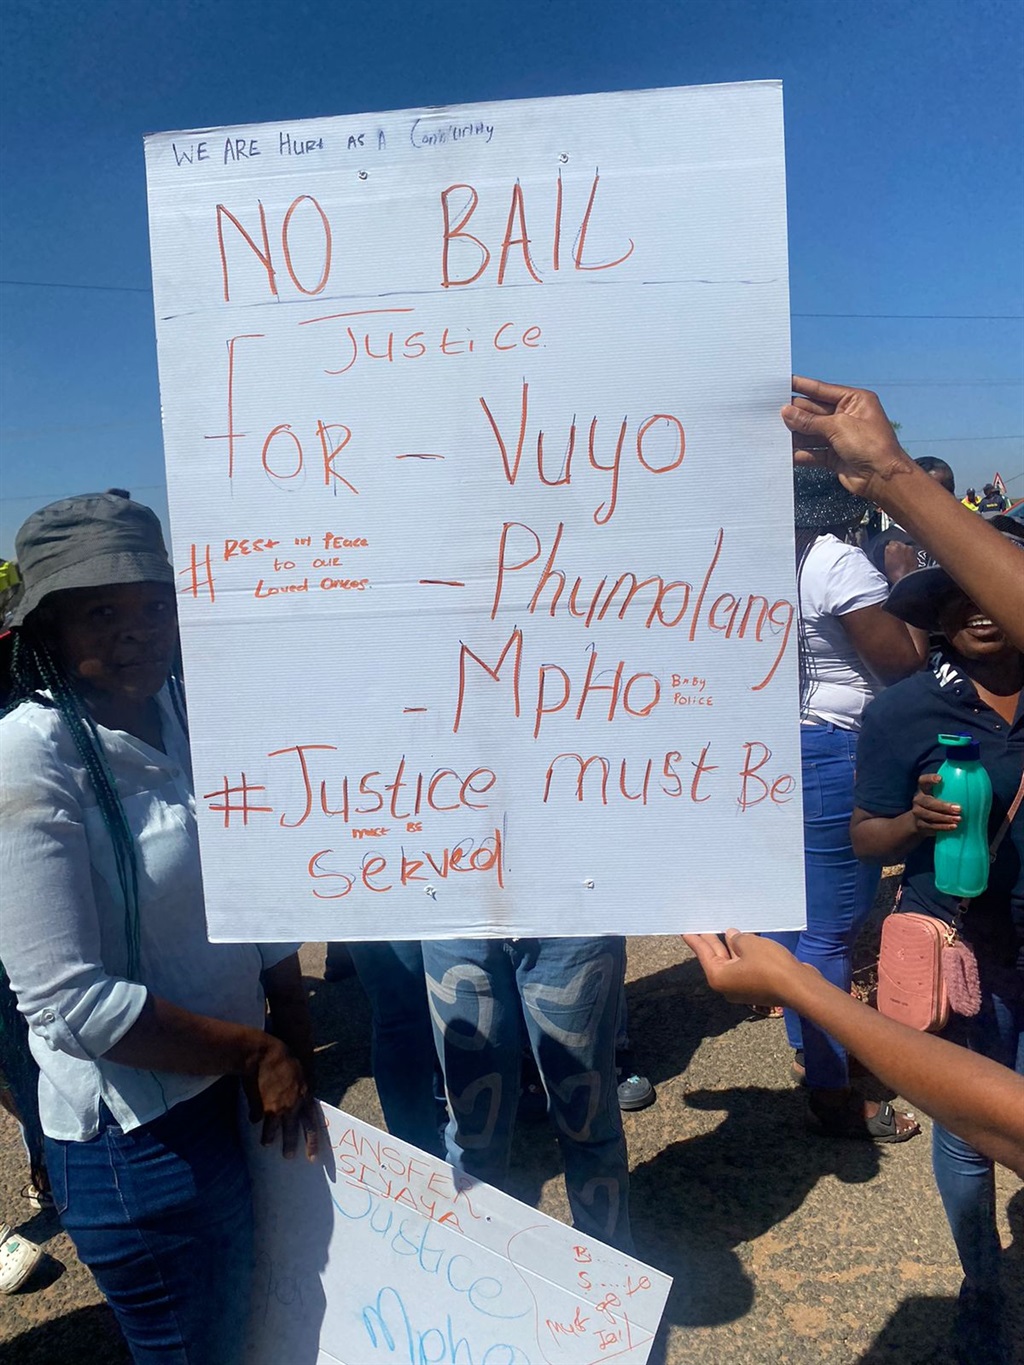 Residents demonstrate outside the court and demand no bail for suspects. Photo by Keletso Mkhwanazi